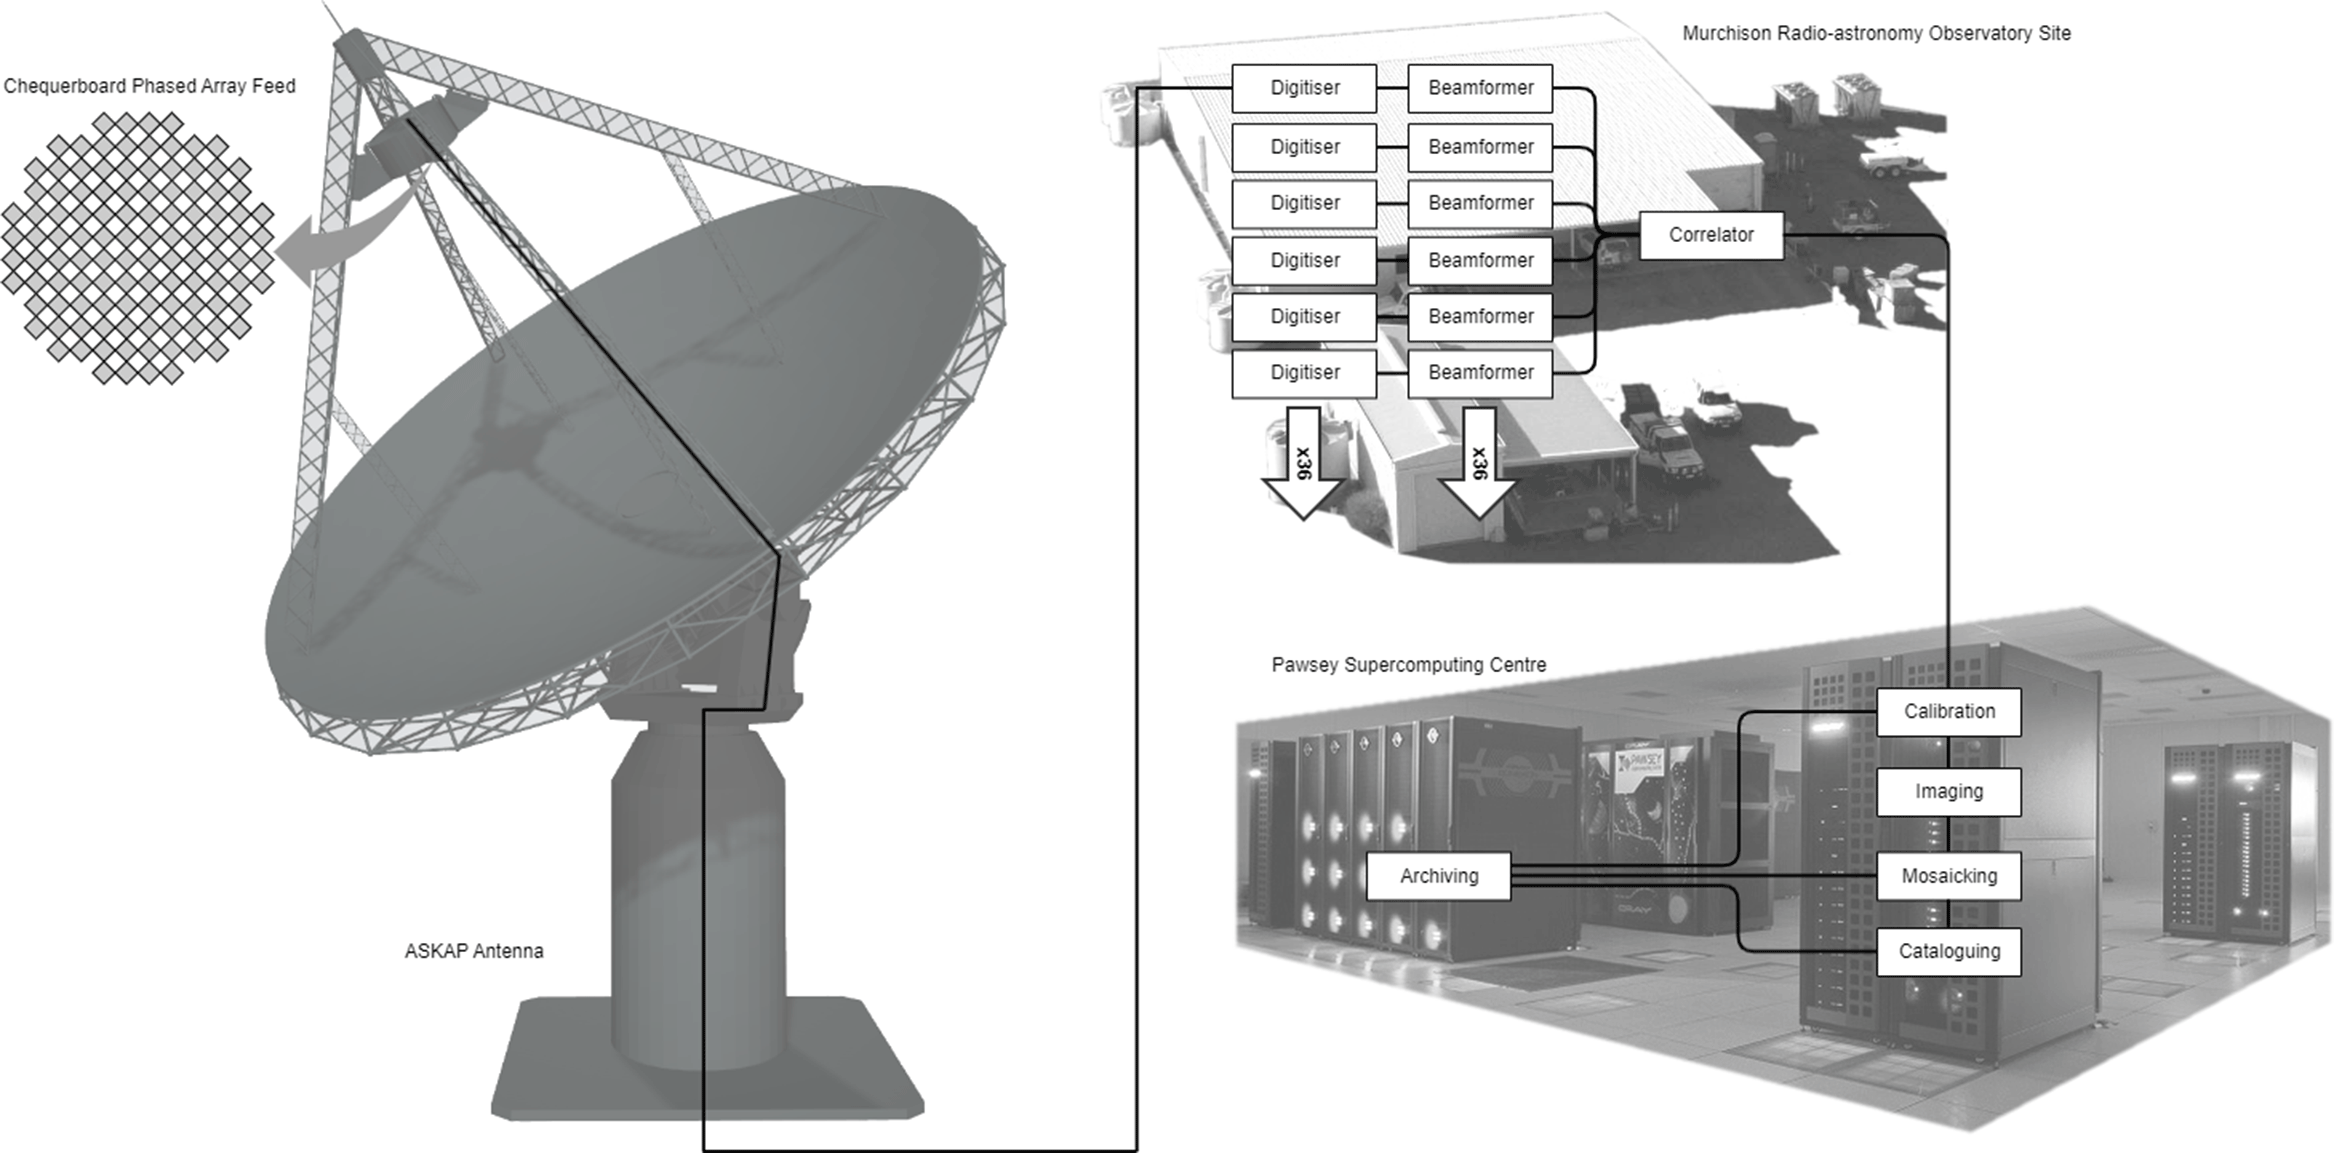 Diagram showing the flow of data through ASKAP: PAF receives information which is sent to the digitisers, beamformers and correlators at the MRO, before being sent to the Pawsey supercomputer for final processing and archiving